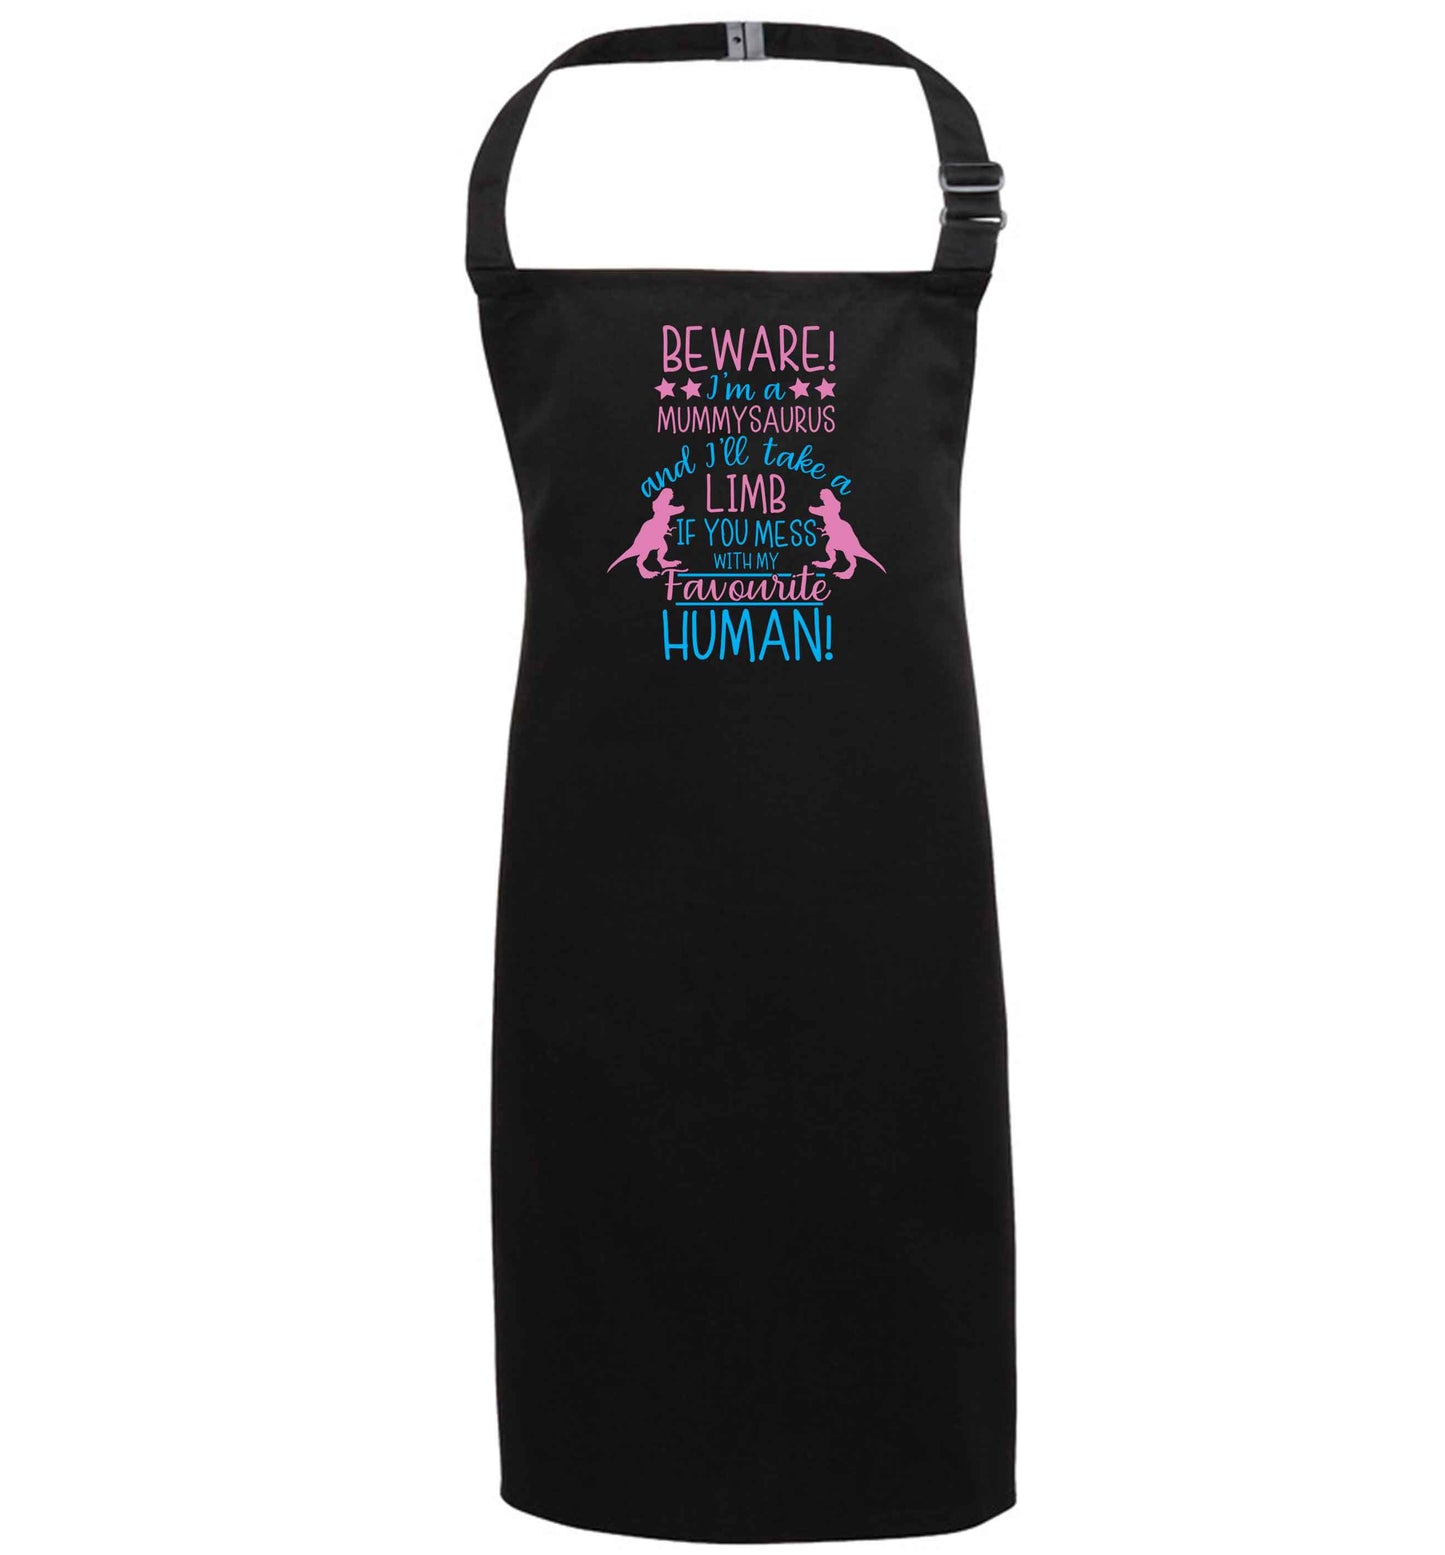 Perfect gift for any protective mummysaurus! Beware I'm a mummysaurus and I'll take a limb if you mess with my favourite human black apron 7-10 years